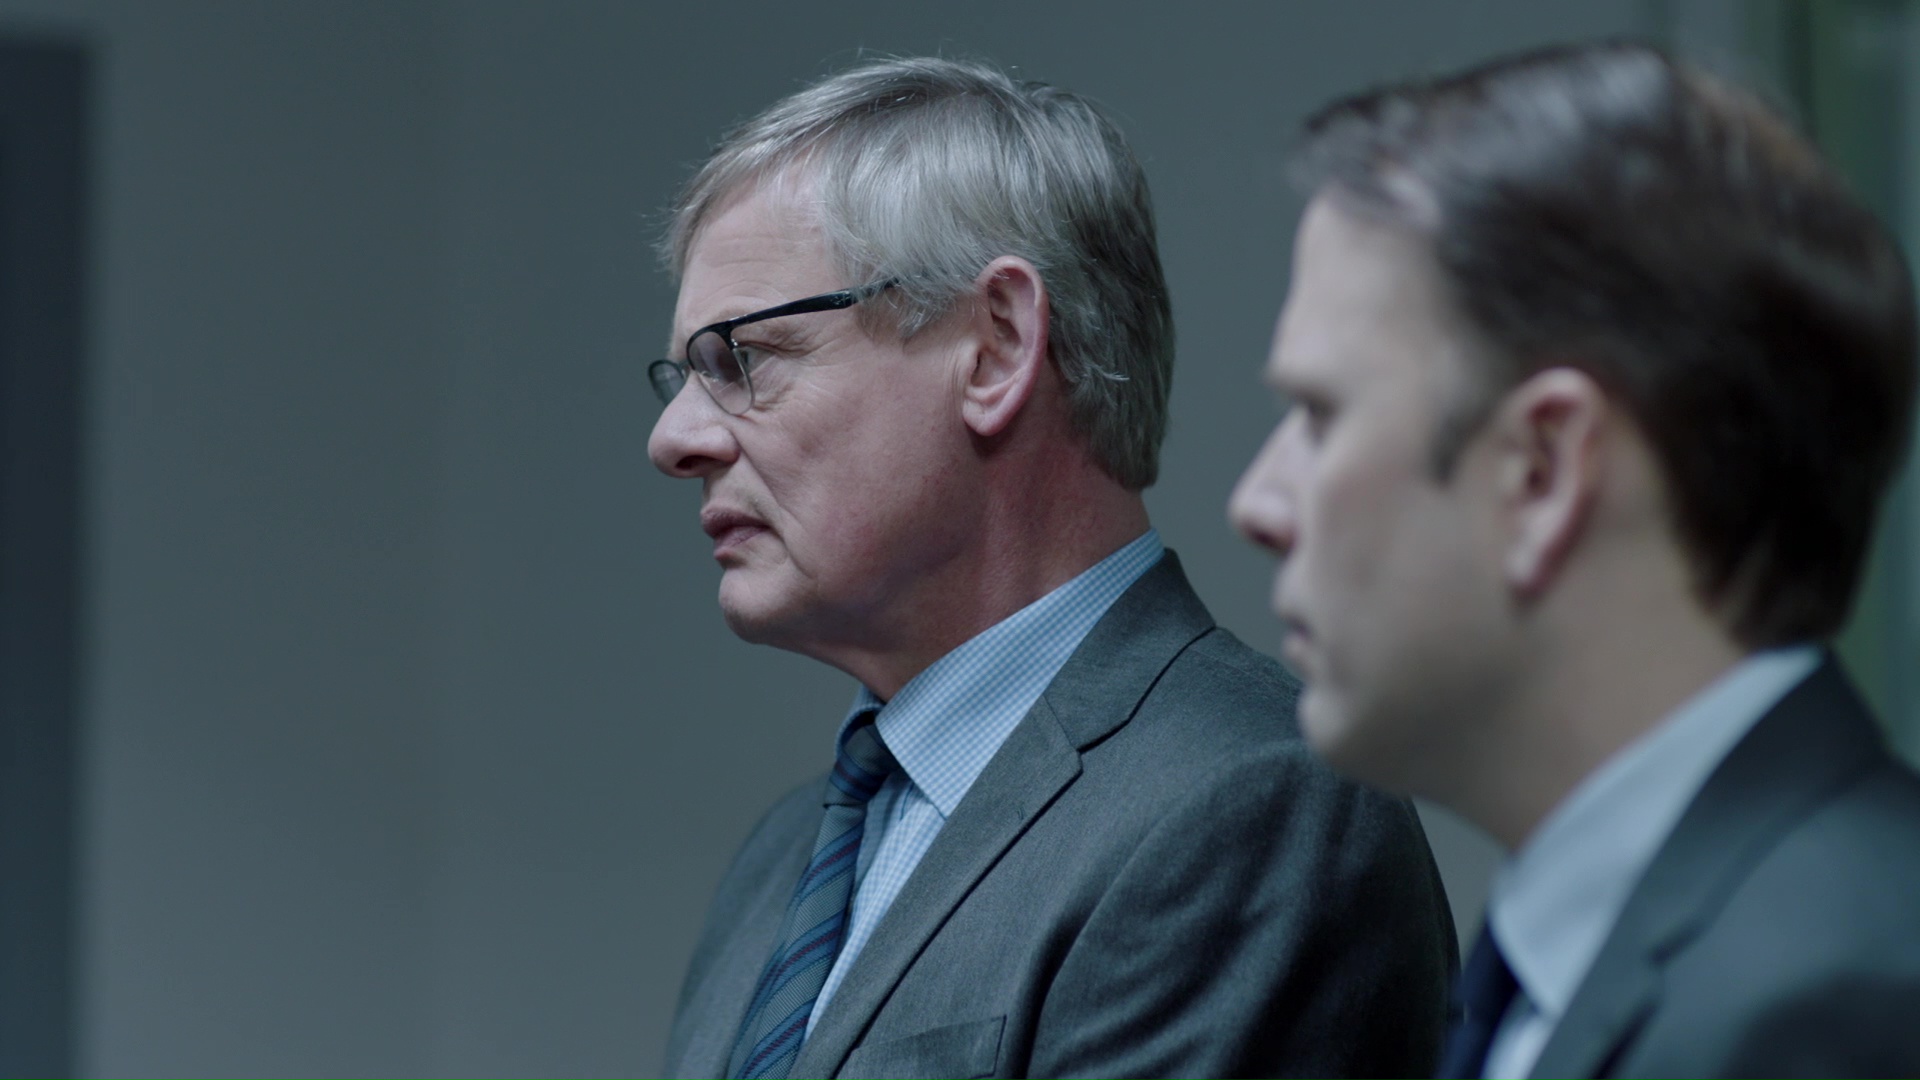 The First Day, When the battered body of French student Amélie Delagrange is found on Twickenham Green, DCI Colin Sutton is appointed senior investigating officer, his first big case., TV-MA, Season 1058646, Episode 1